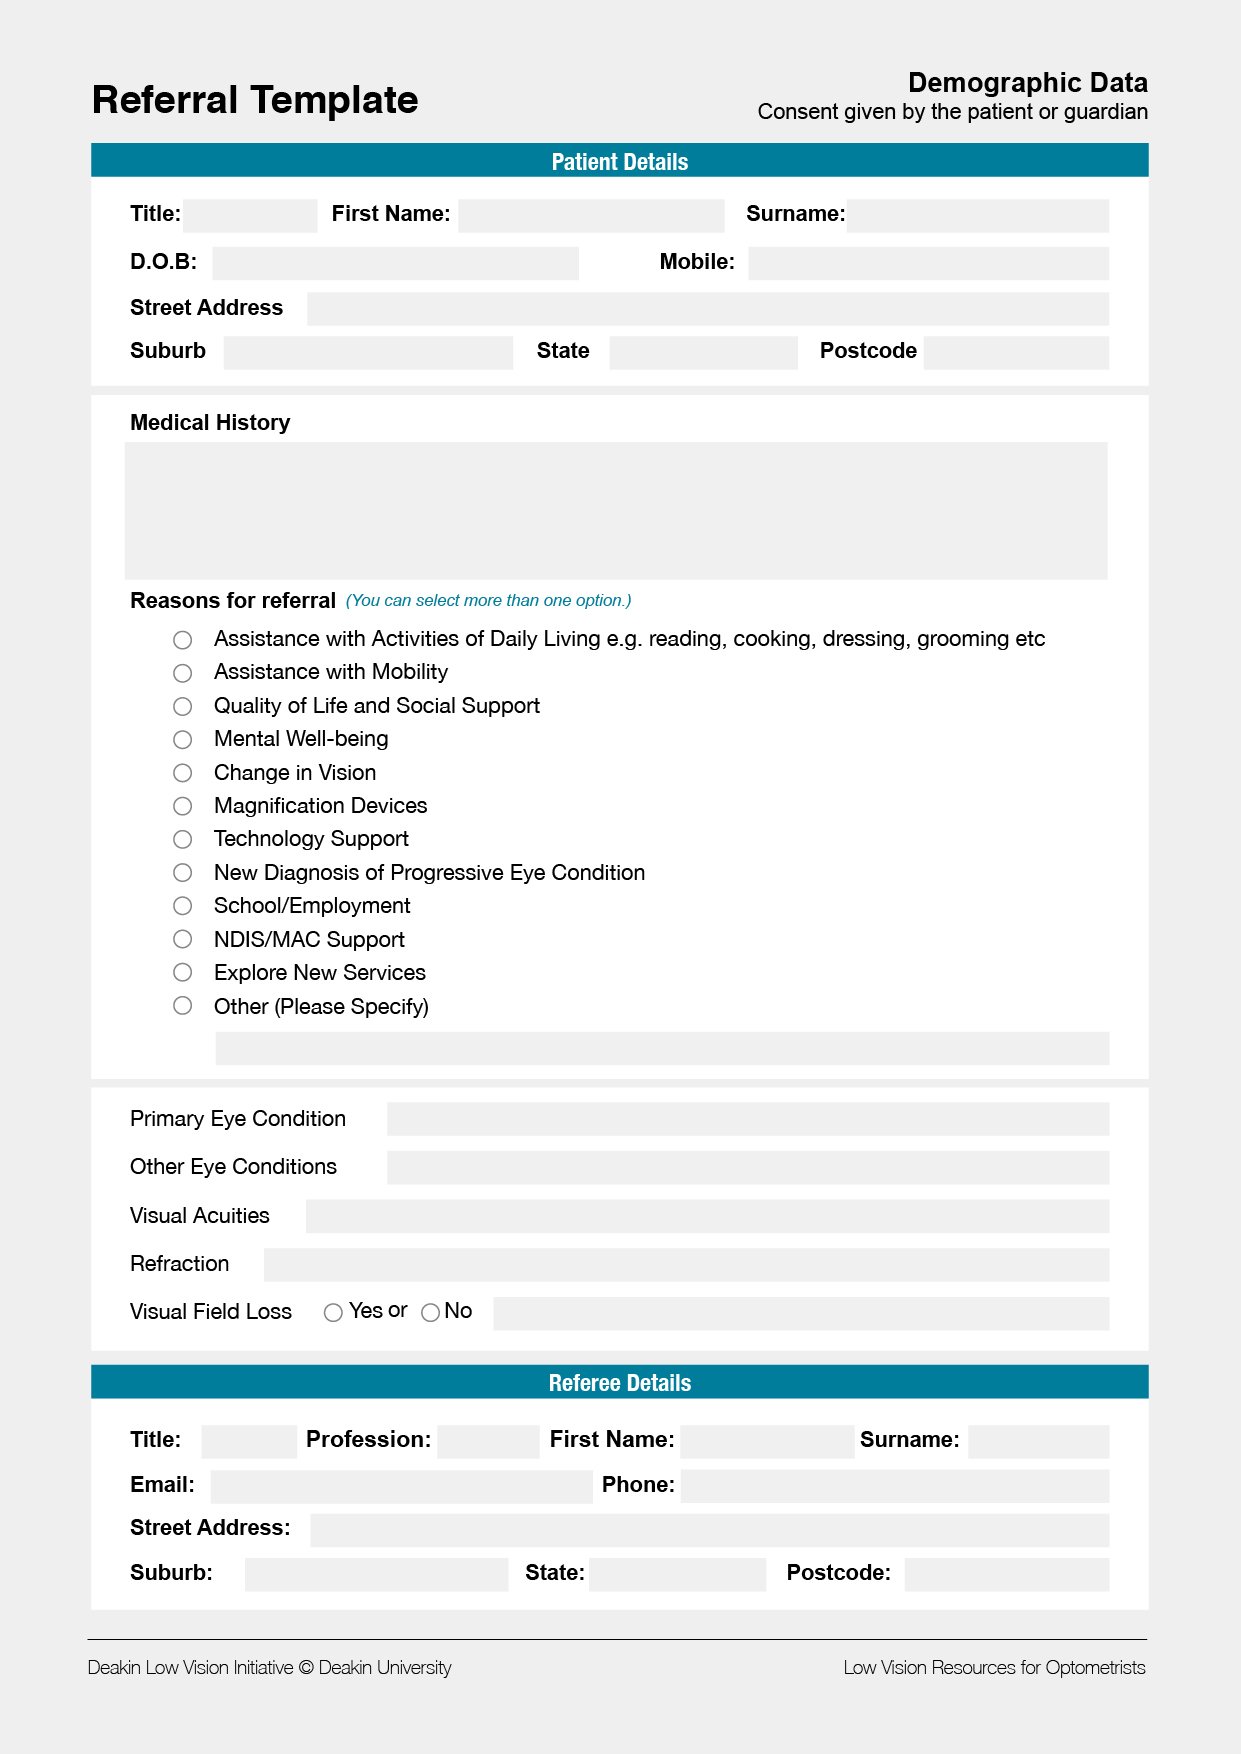 Referral-template-Form-1